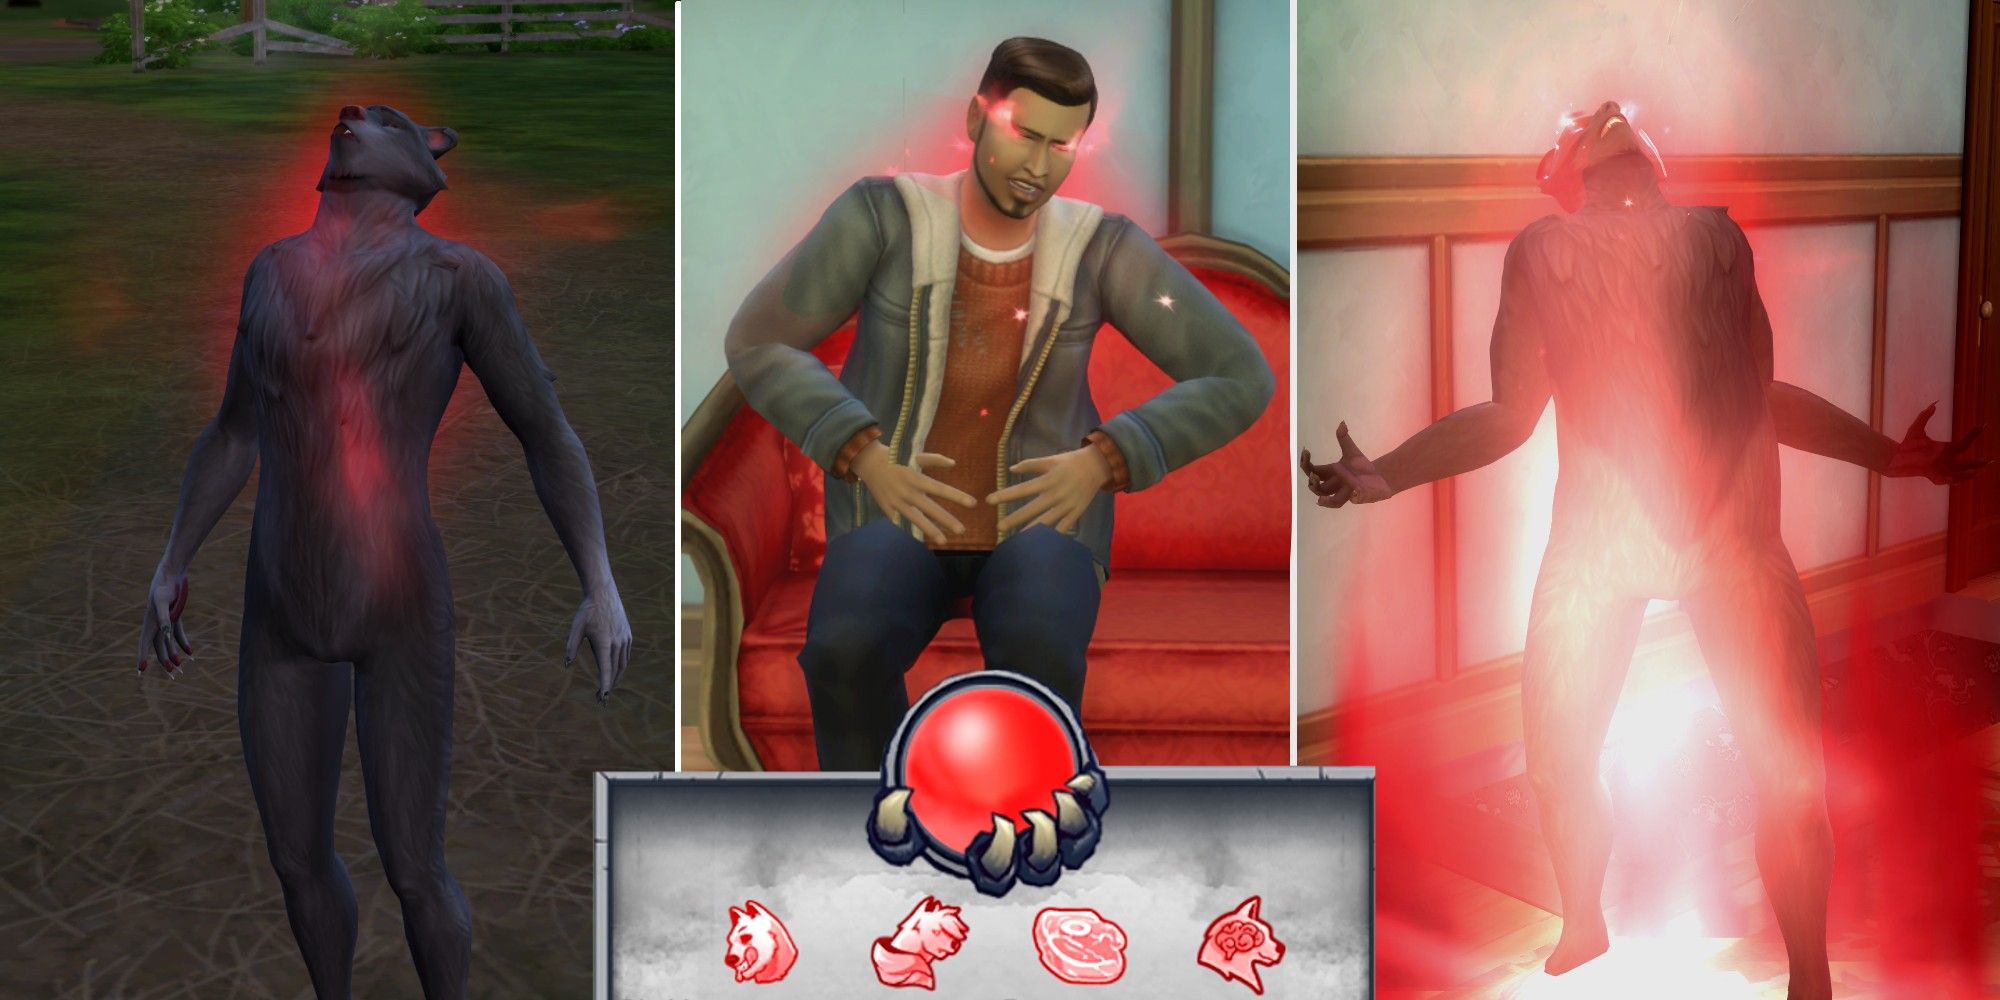 Werewolf Sims glowing with a red aura indicating their Fury metre's fullness in The Sims 4 Werewolves